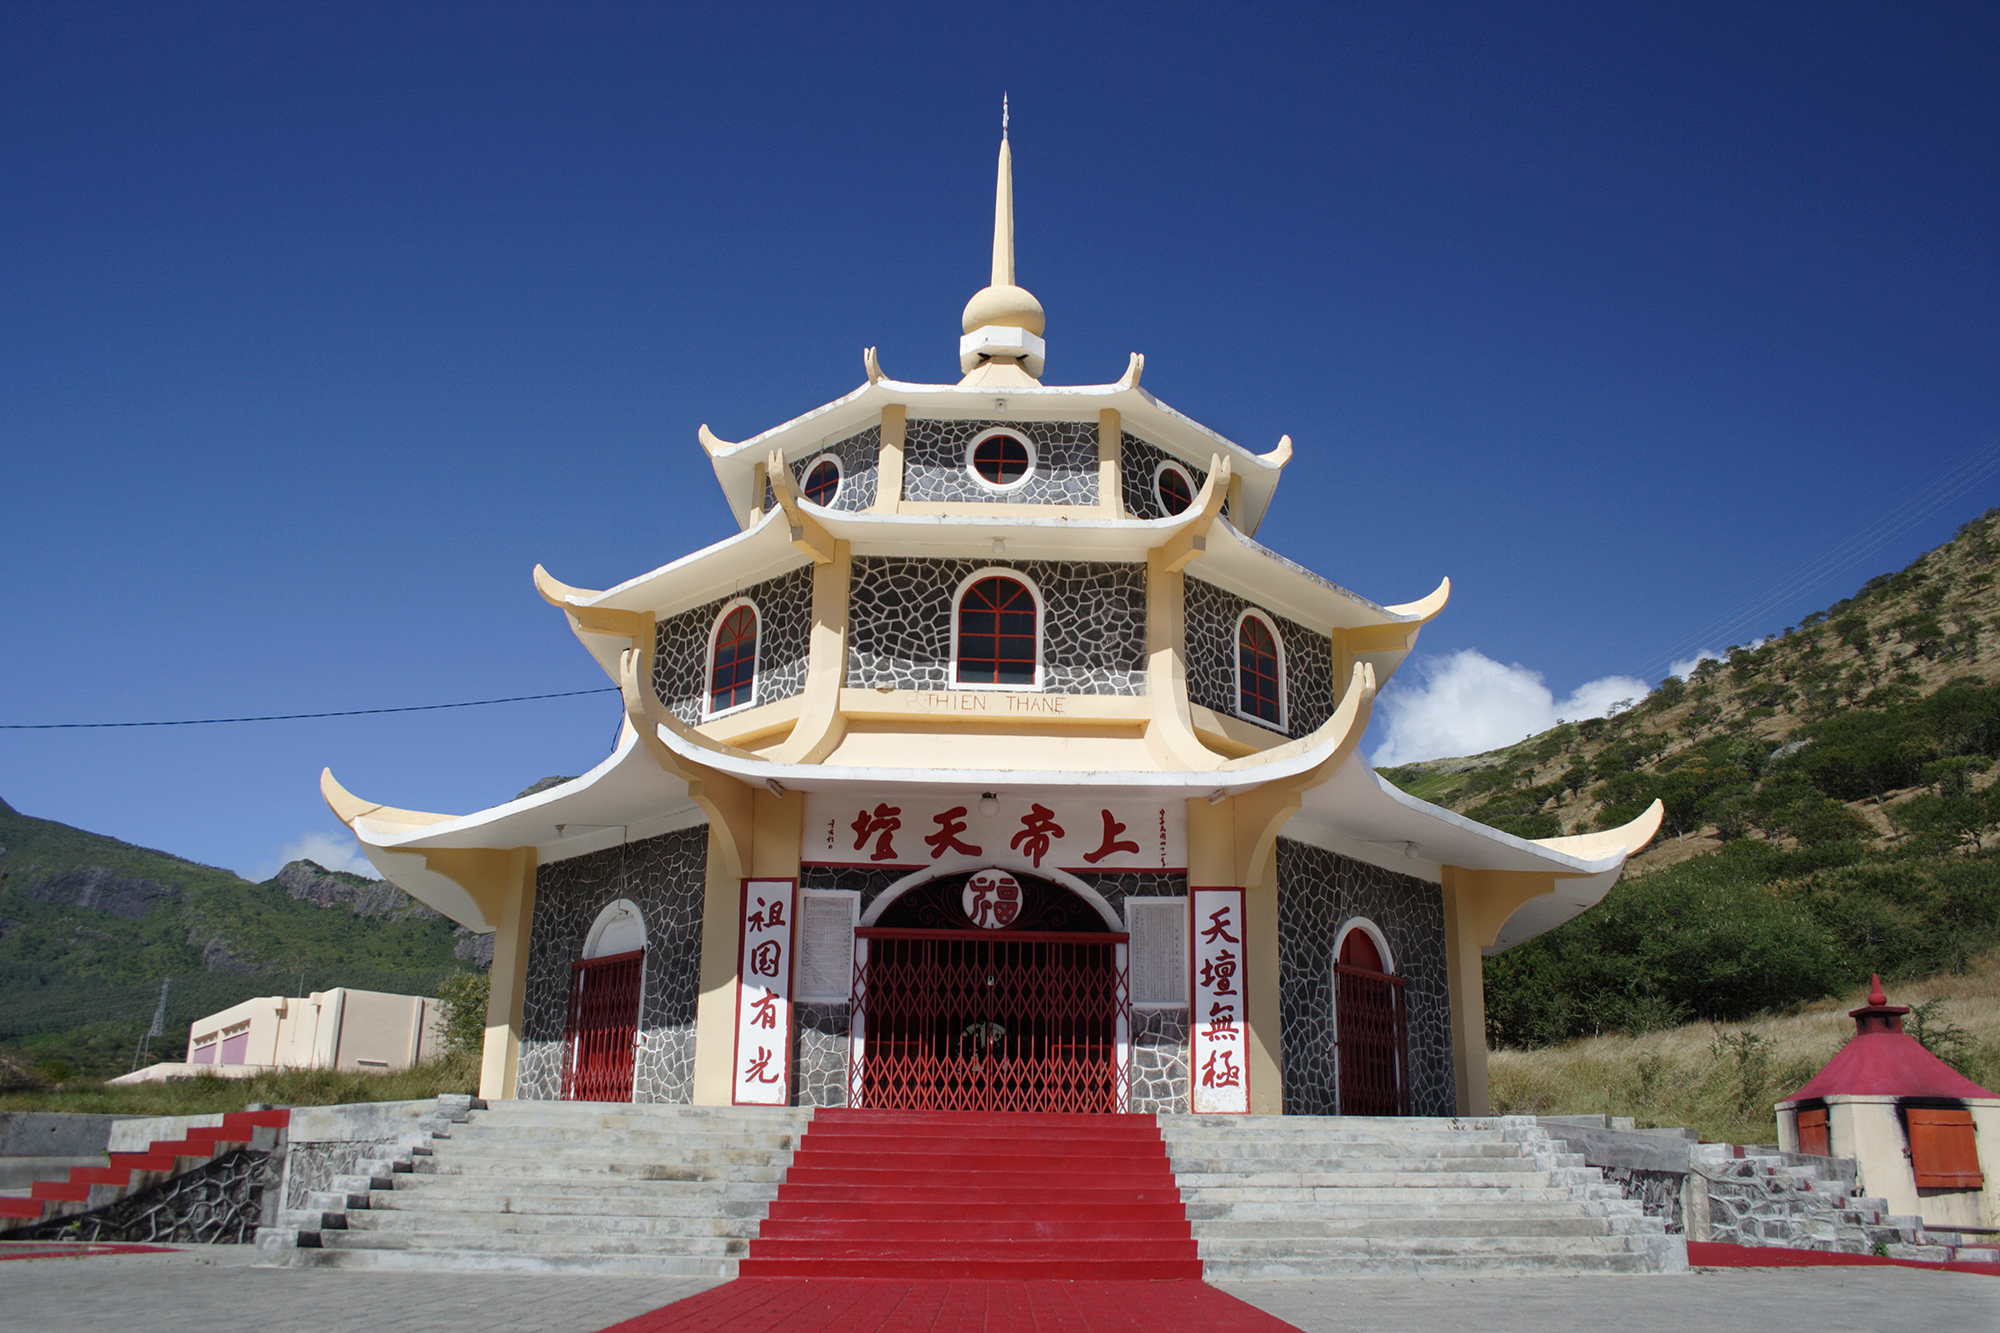 Chinese pagoda in Port Louis, Mauritius